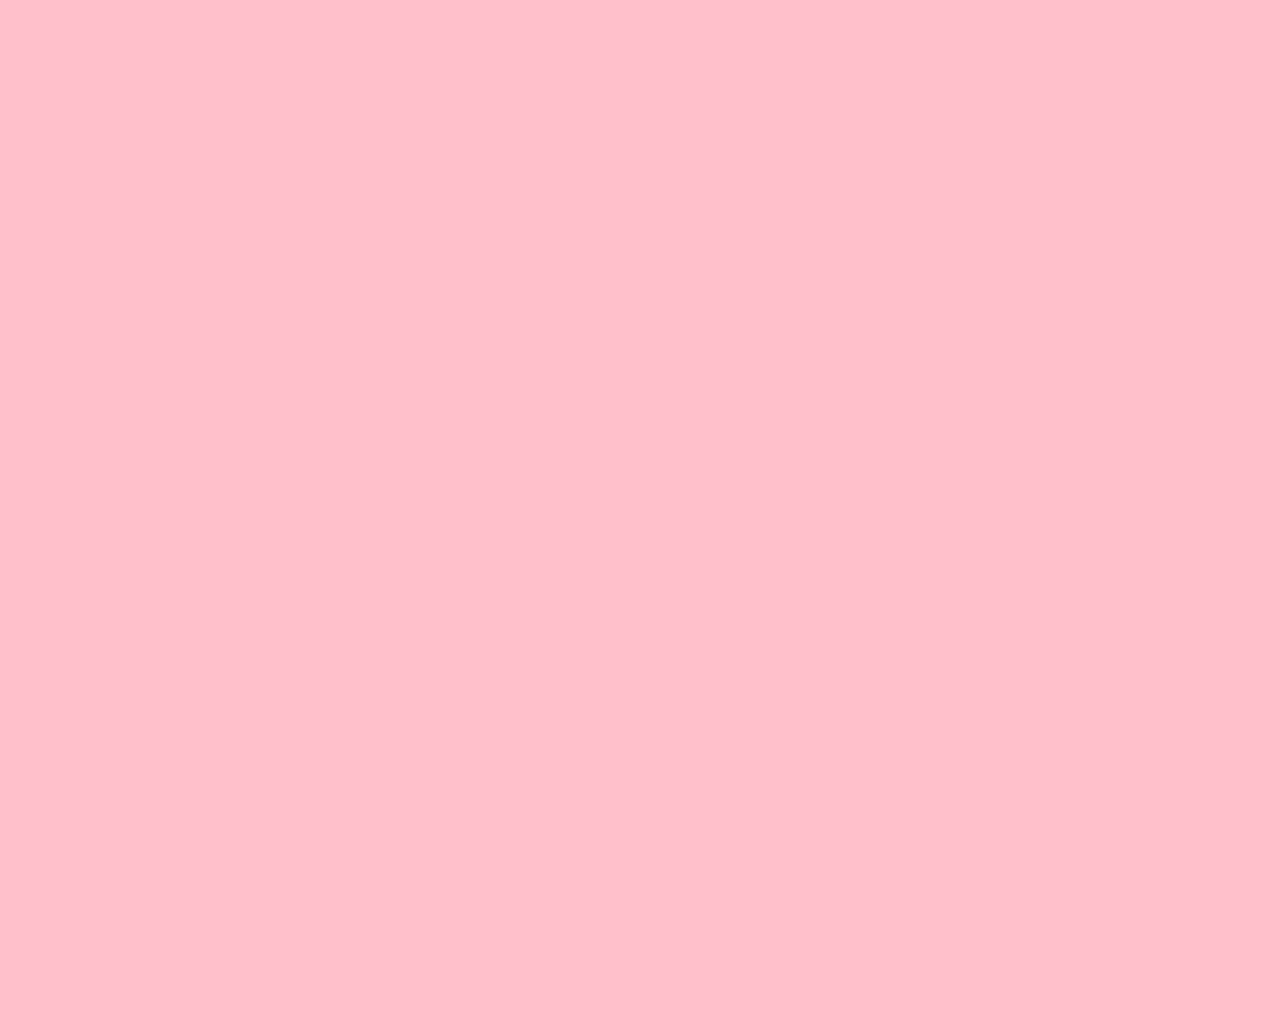 1280x1024 Pink Solid Color Background